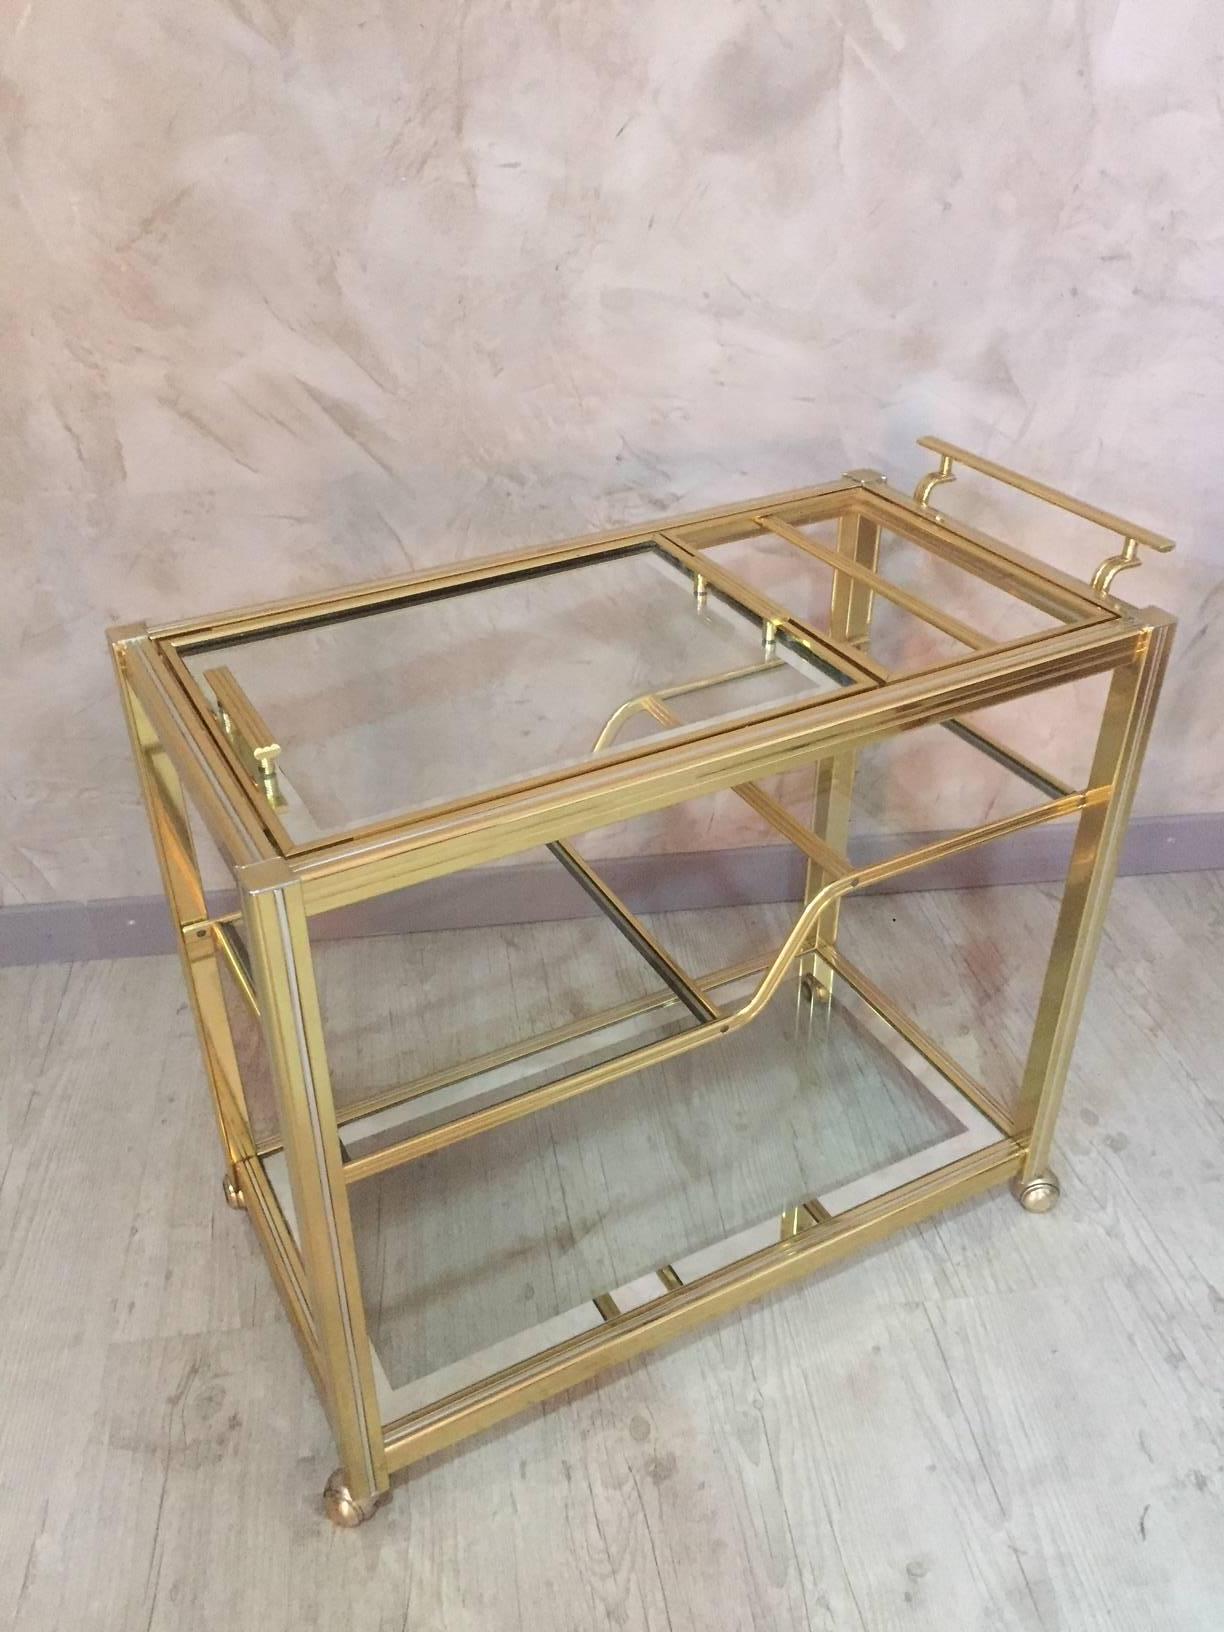 Italian style gilded brass and glass rolling dessert table from the 1970s. Italian style called Romeo.
The tray on the top is removable with the two handles.